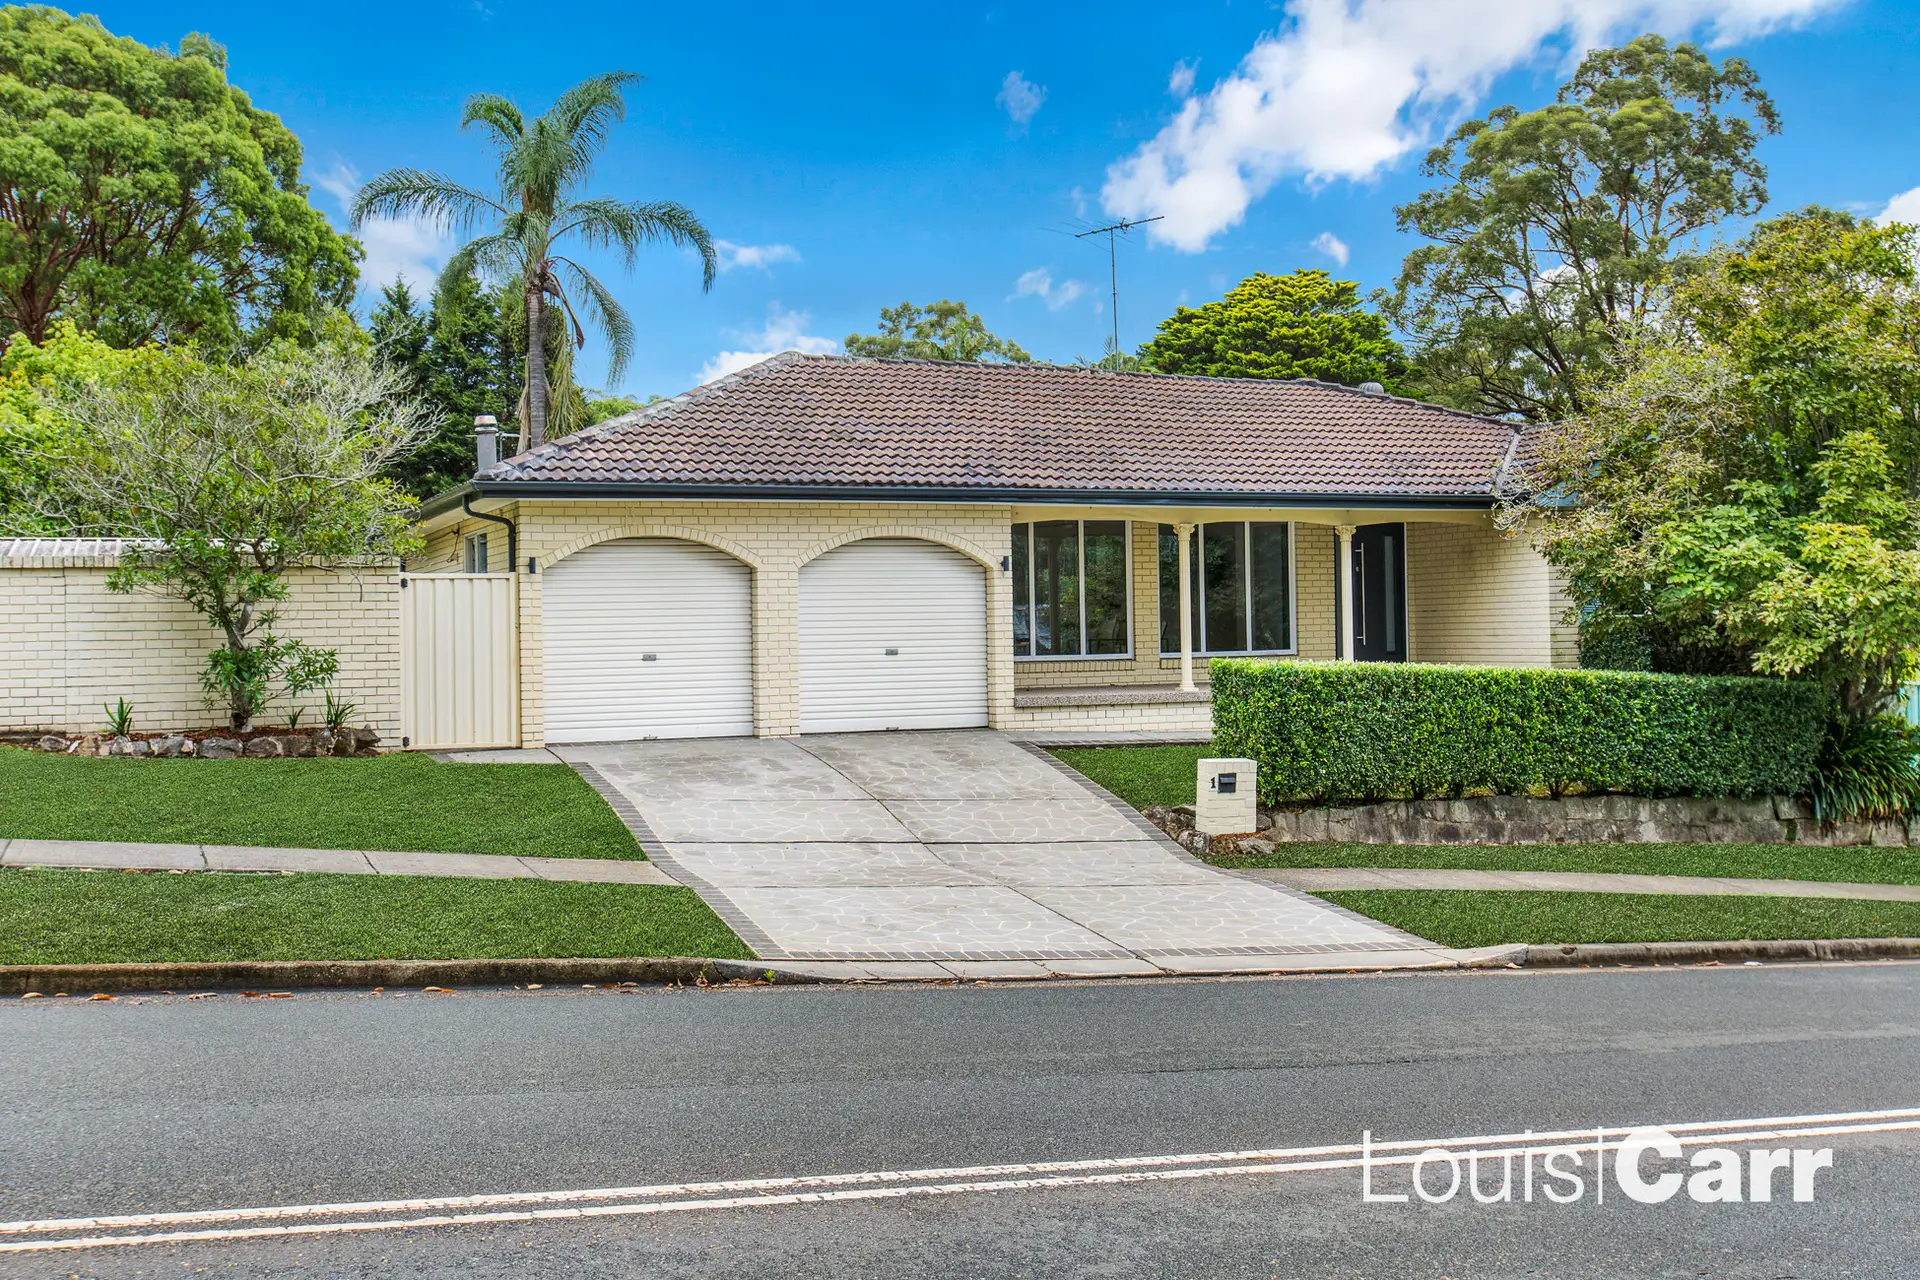 Photo #1: 1 Edward Bennett Drive, Cherrybrook - Sold by Louis Carr Real Estate